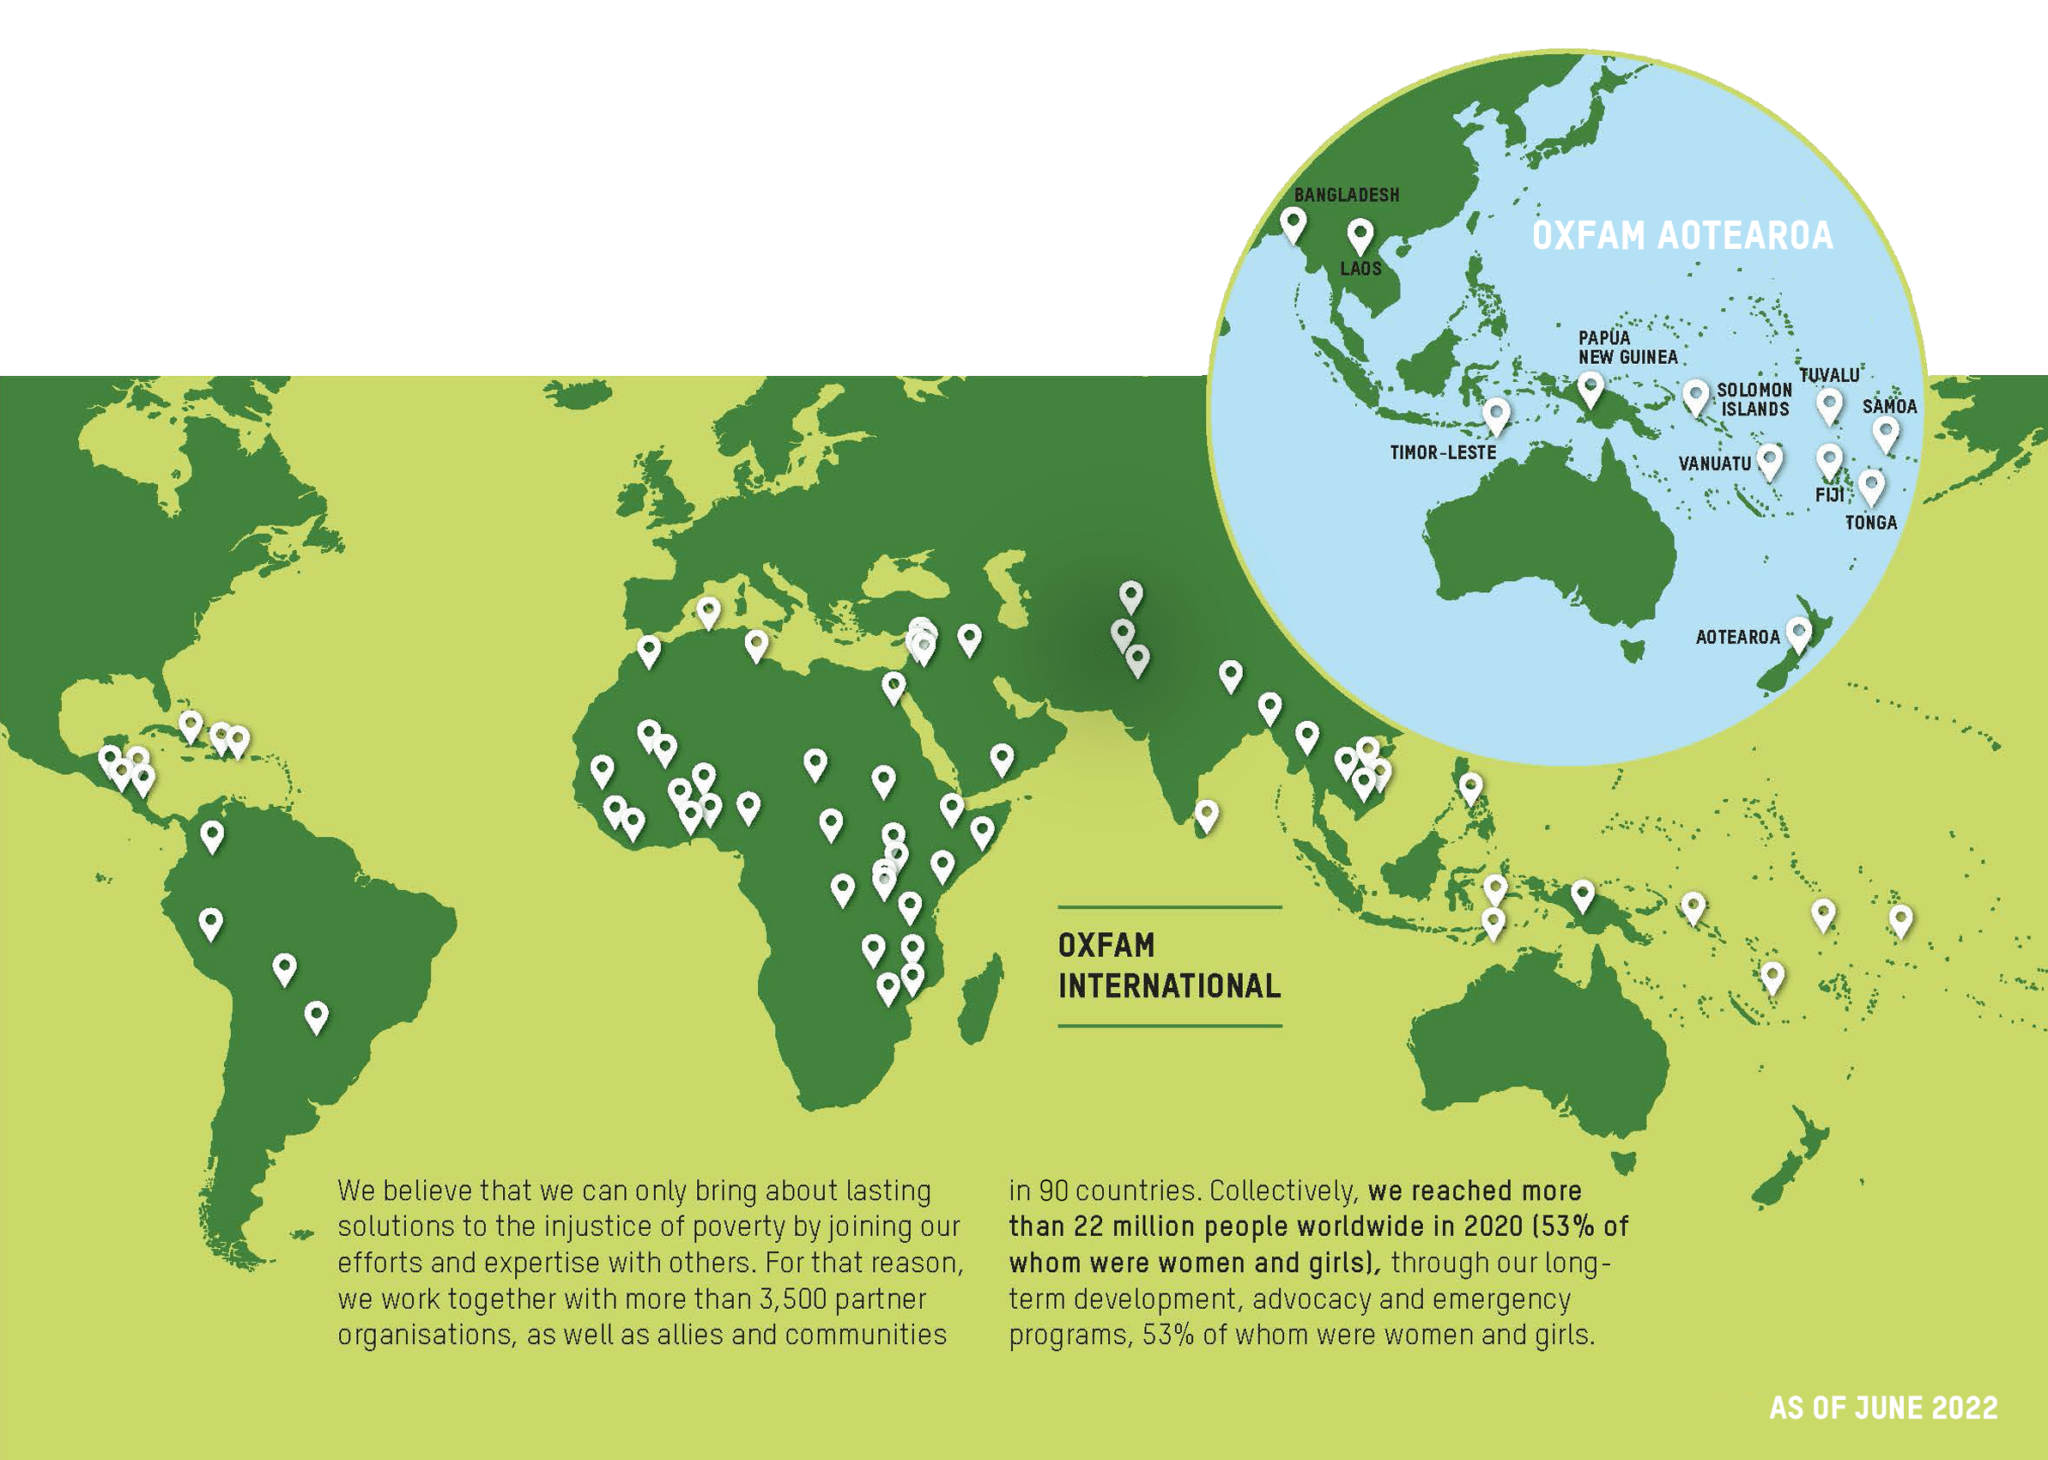 Map showing countries where Oxfam works